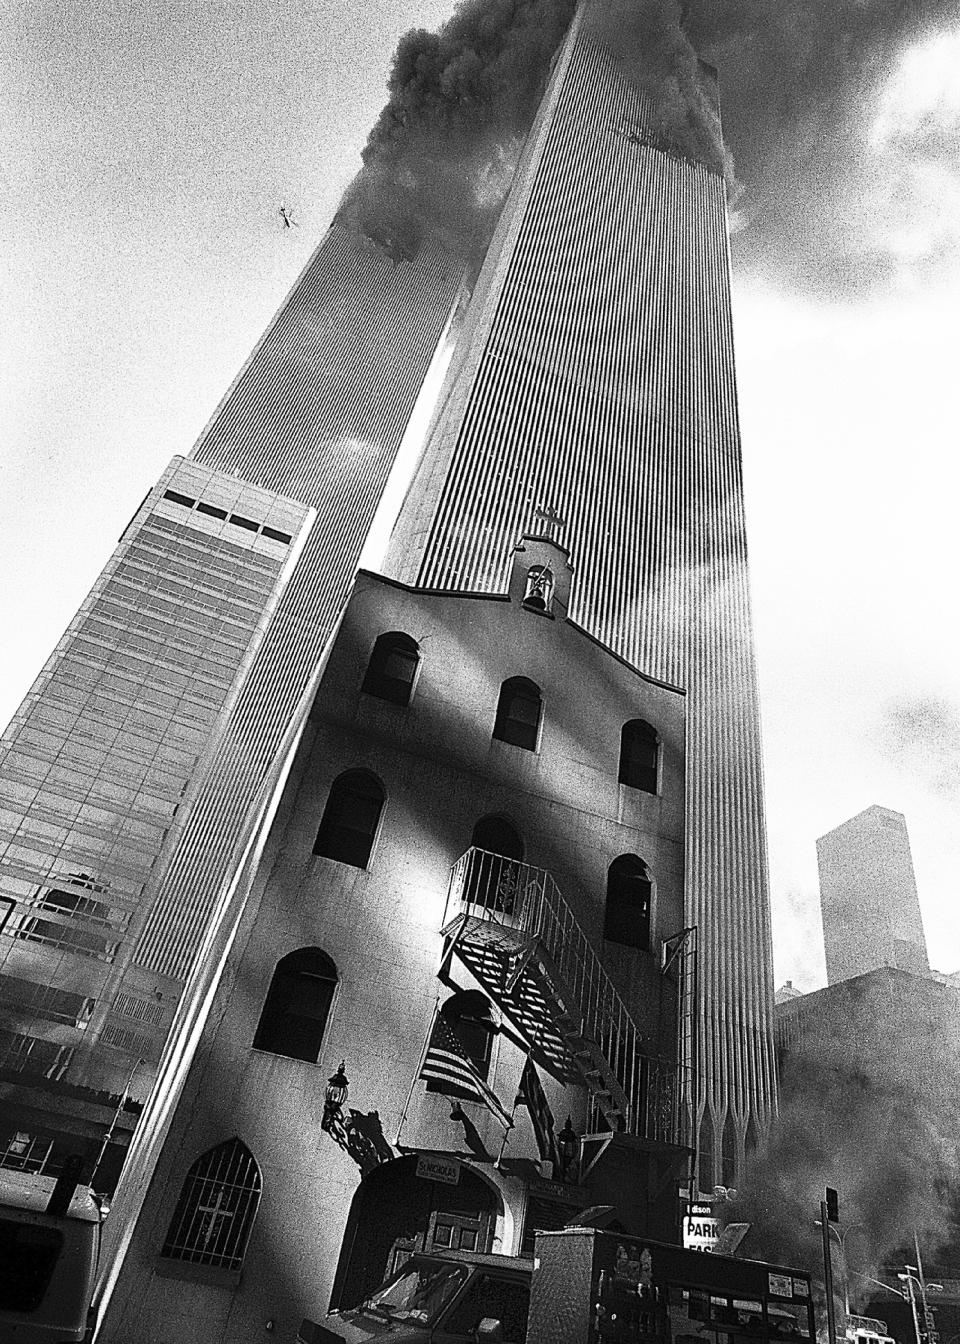 In this Sept. 11, 2001, photo provided by the Greek Orthodox Archdiocese of America, smoke billows from the World Trade Center towers as St. Nicholas Greek Orthodox Church sits below them in New York's financial district. St. Nicholas was the only house of worship destroyed in the Sept. 11, 2001 attacks. (Greek Orthodox Archdiocese of America via AP)